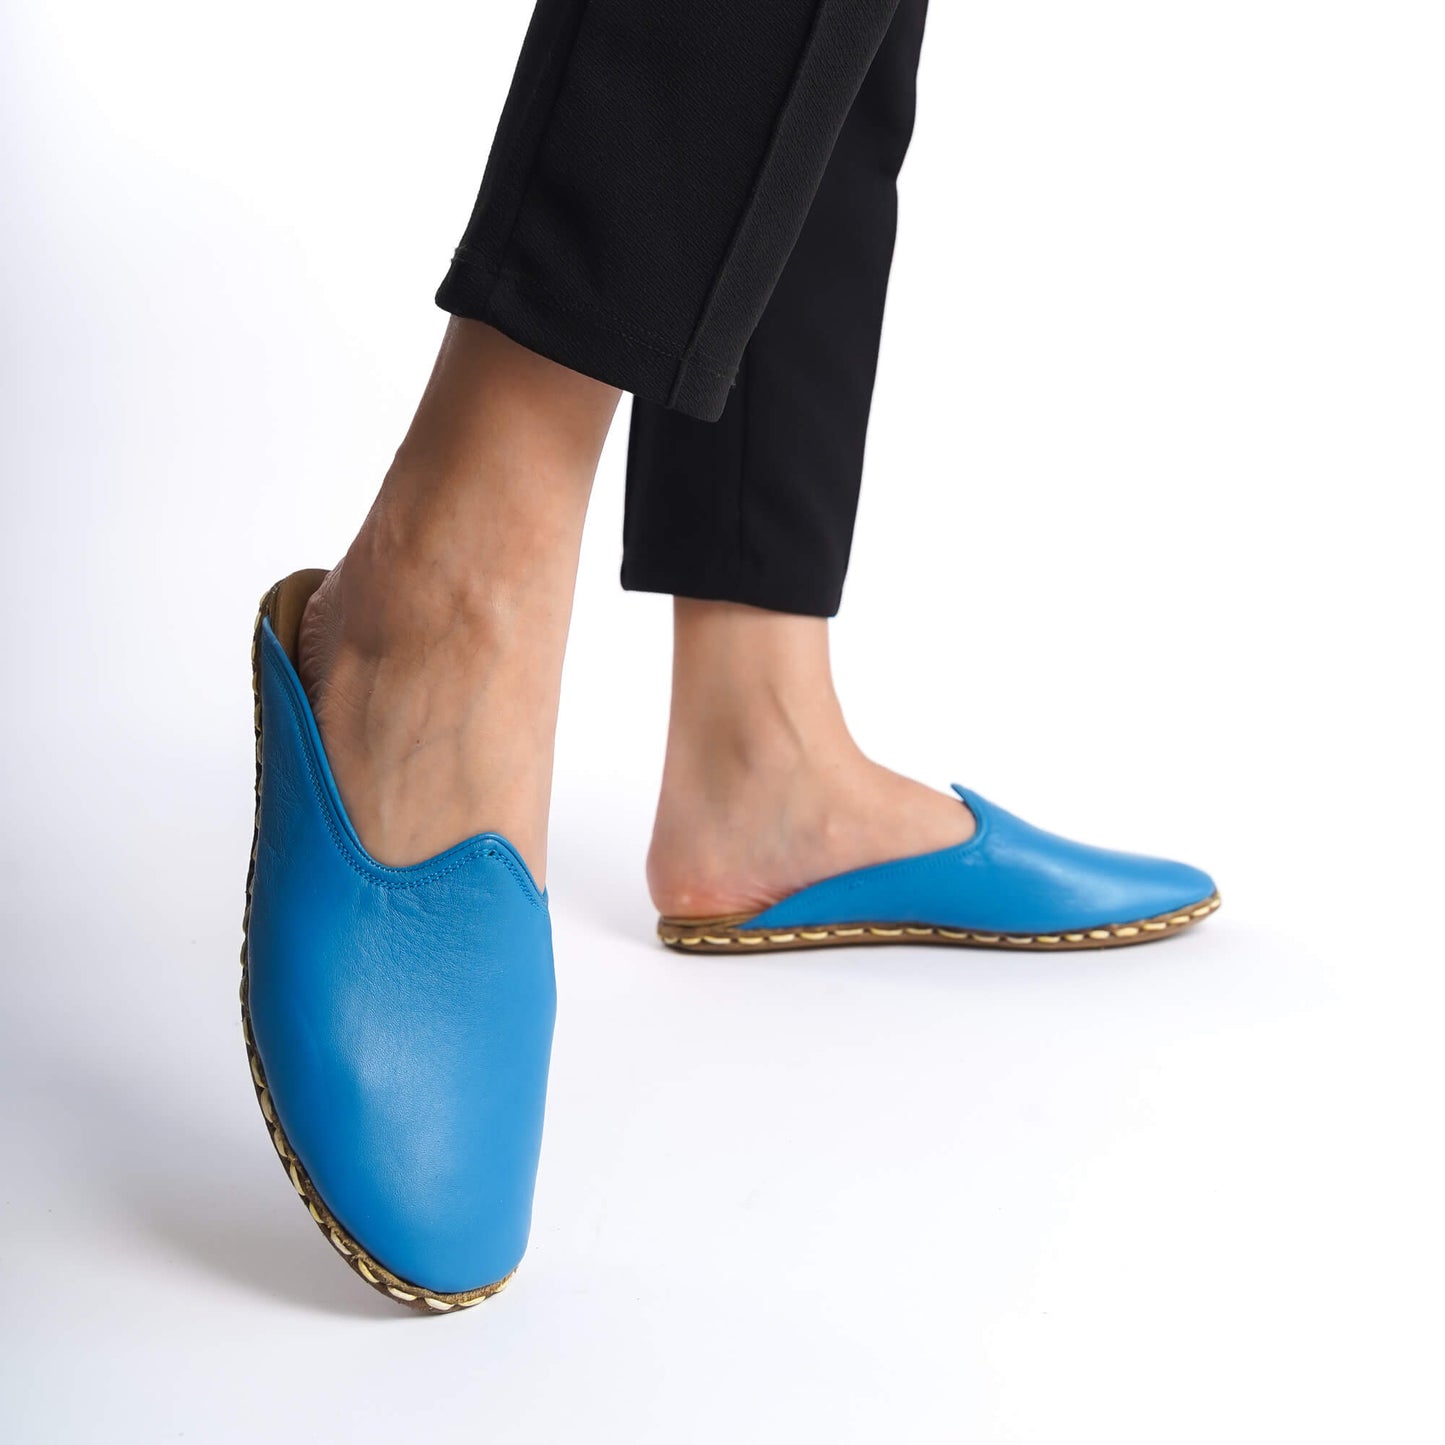 Women's Genuine Leather Blue Mules – Stitched Sole, Ideal for Summer